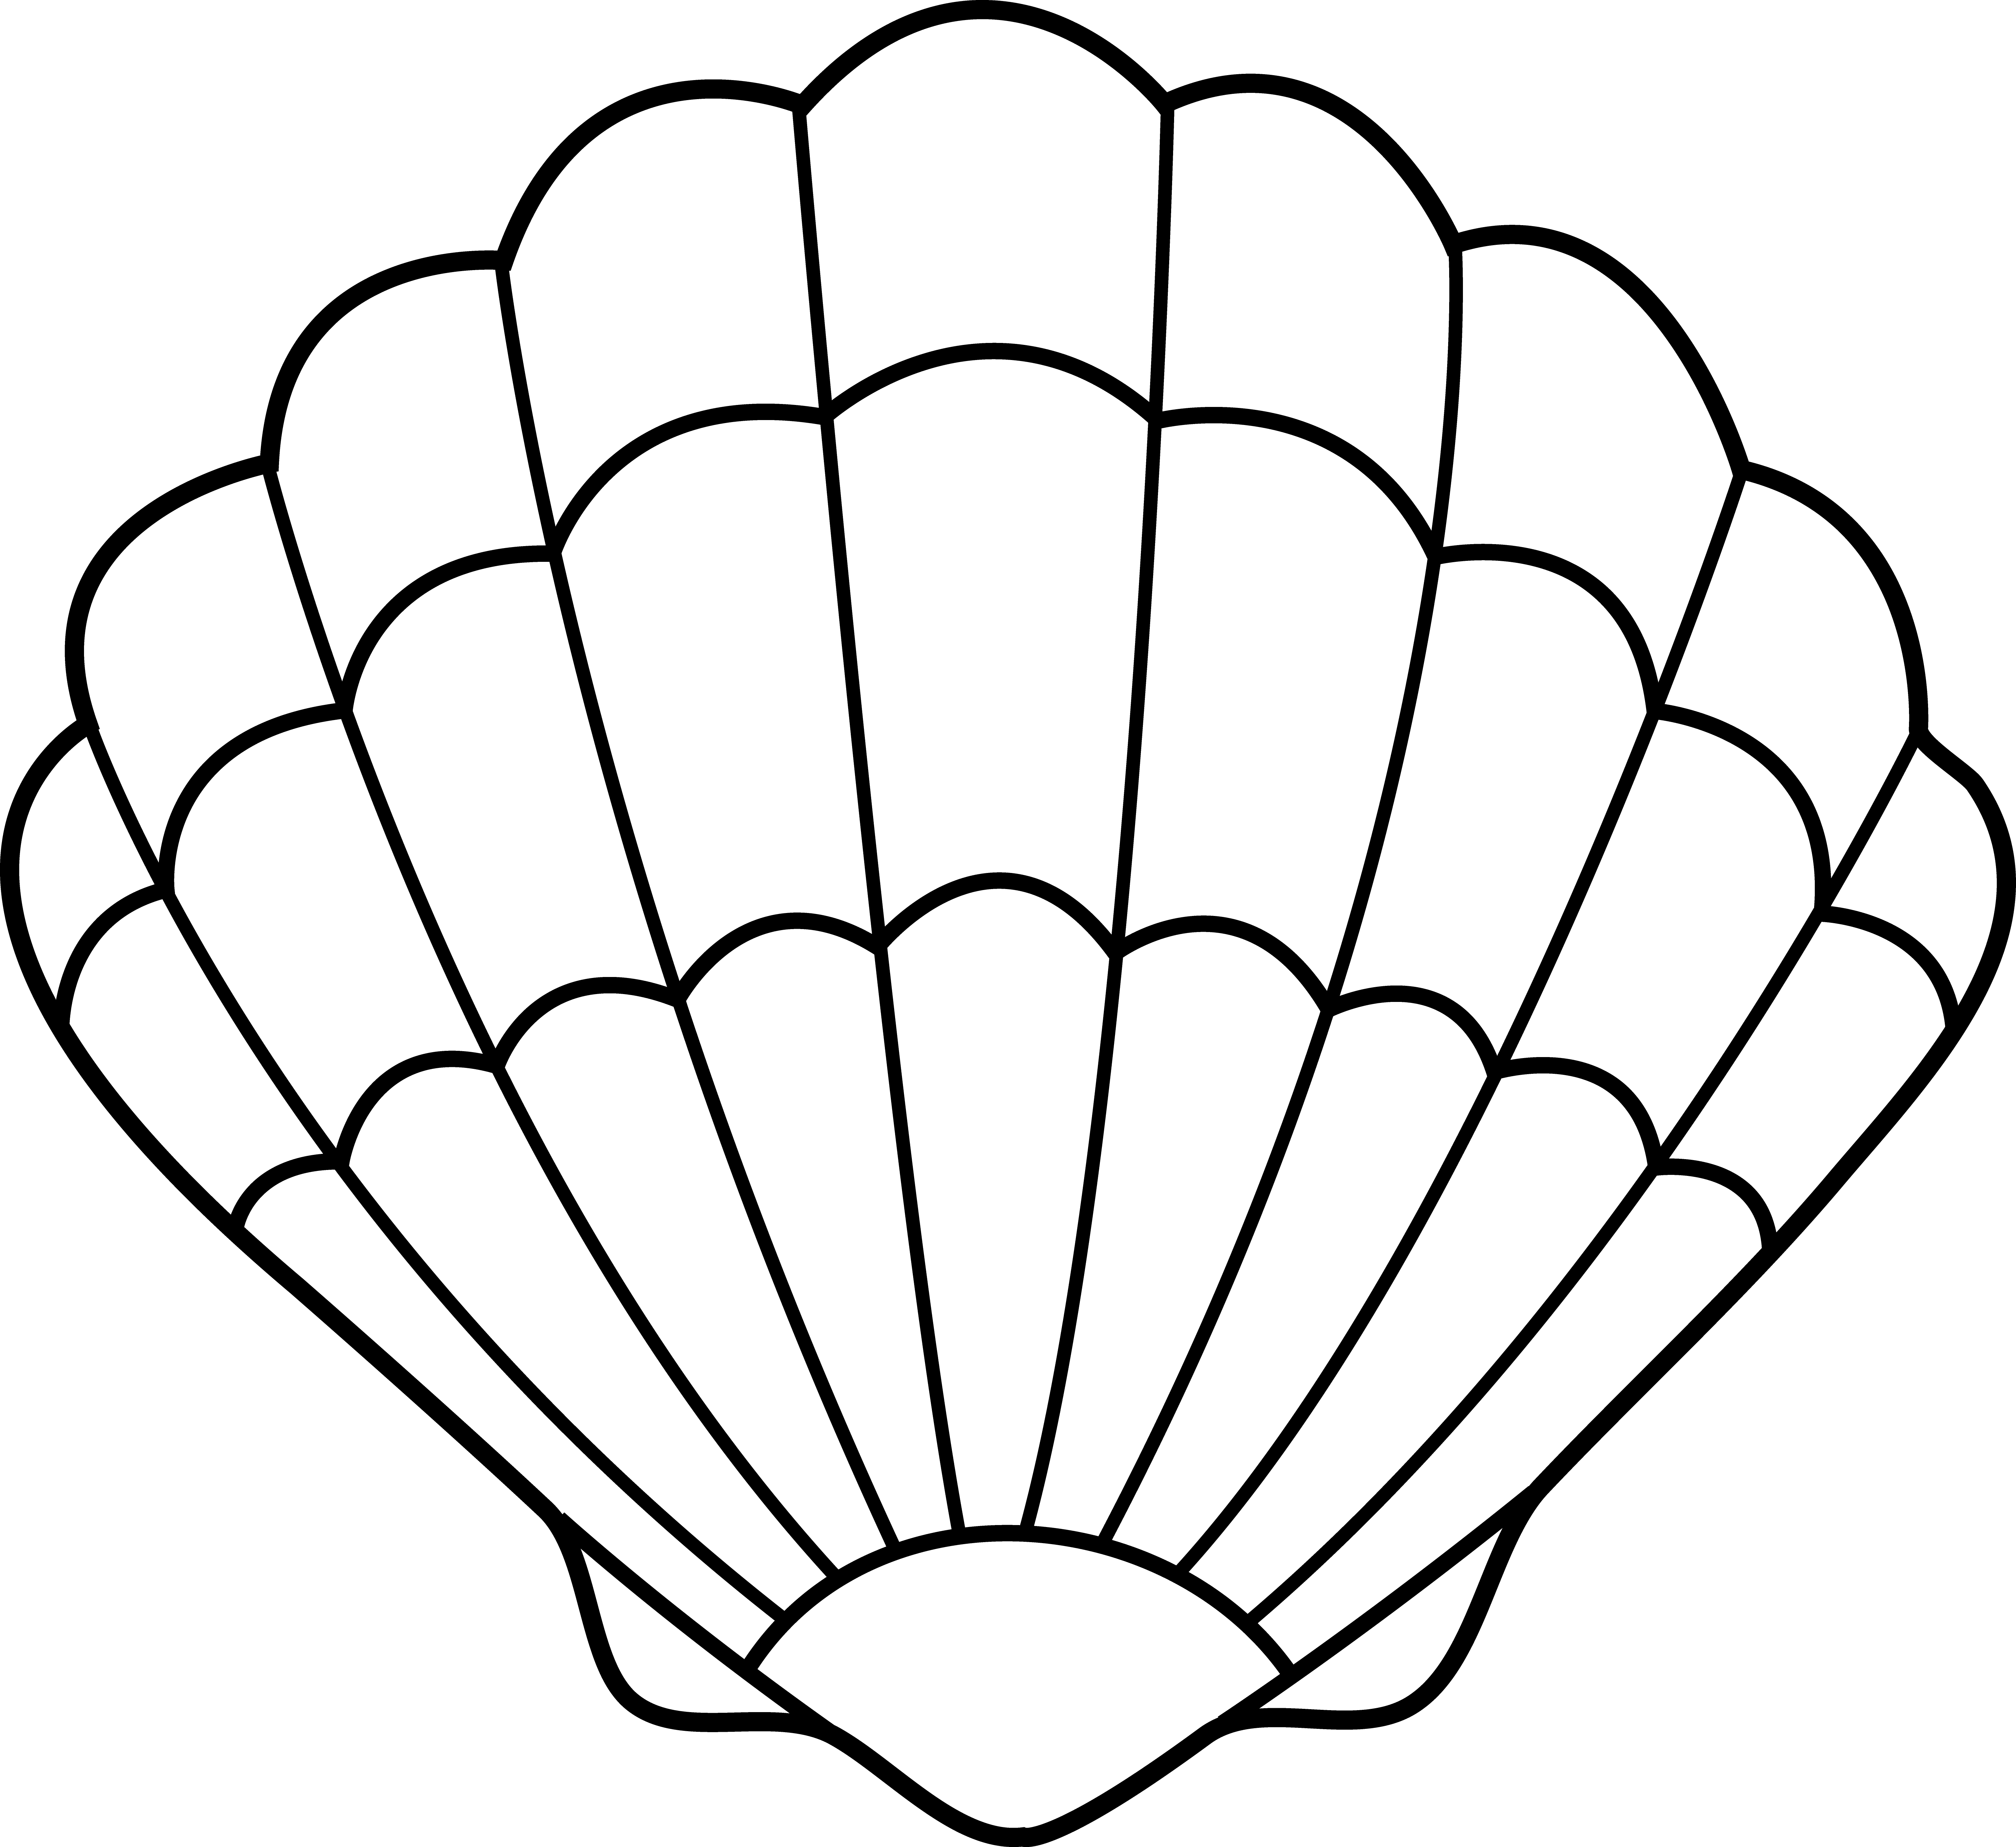 Seashell Silhouette - Free Clipart Images